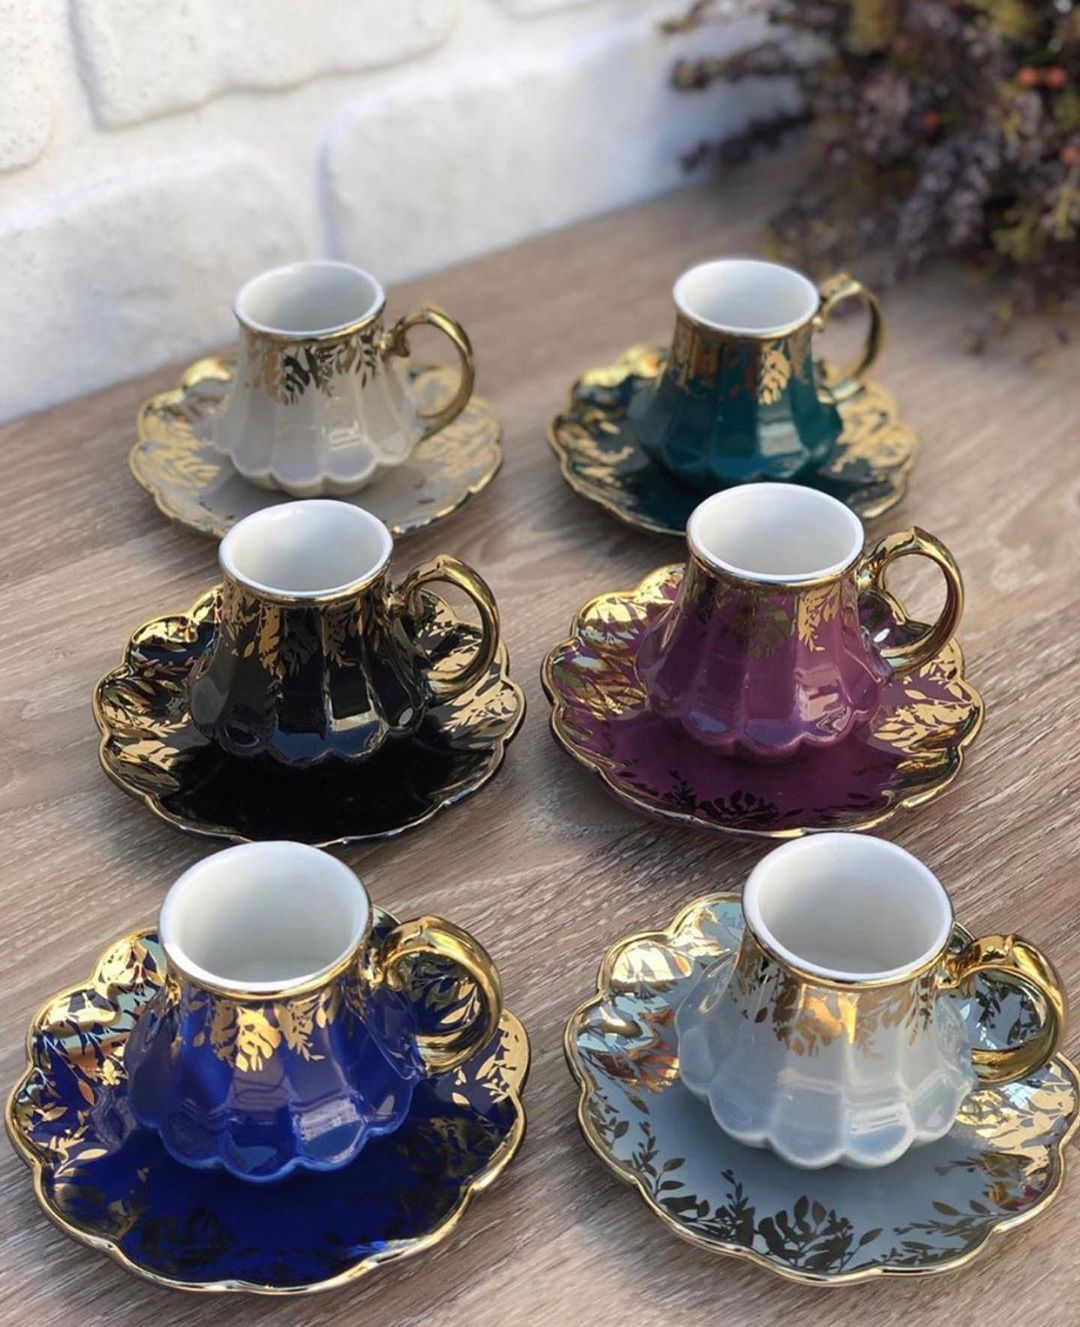 ACAR Turkish First Class Porcelain Coffee Cups and Saucers Set Ceramic Coffee Mugs Best for Home Decoration Demistasse Coffee Set